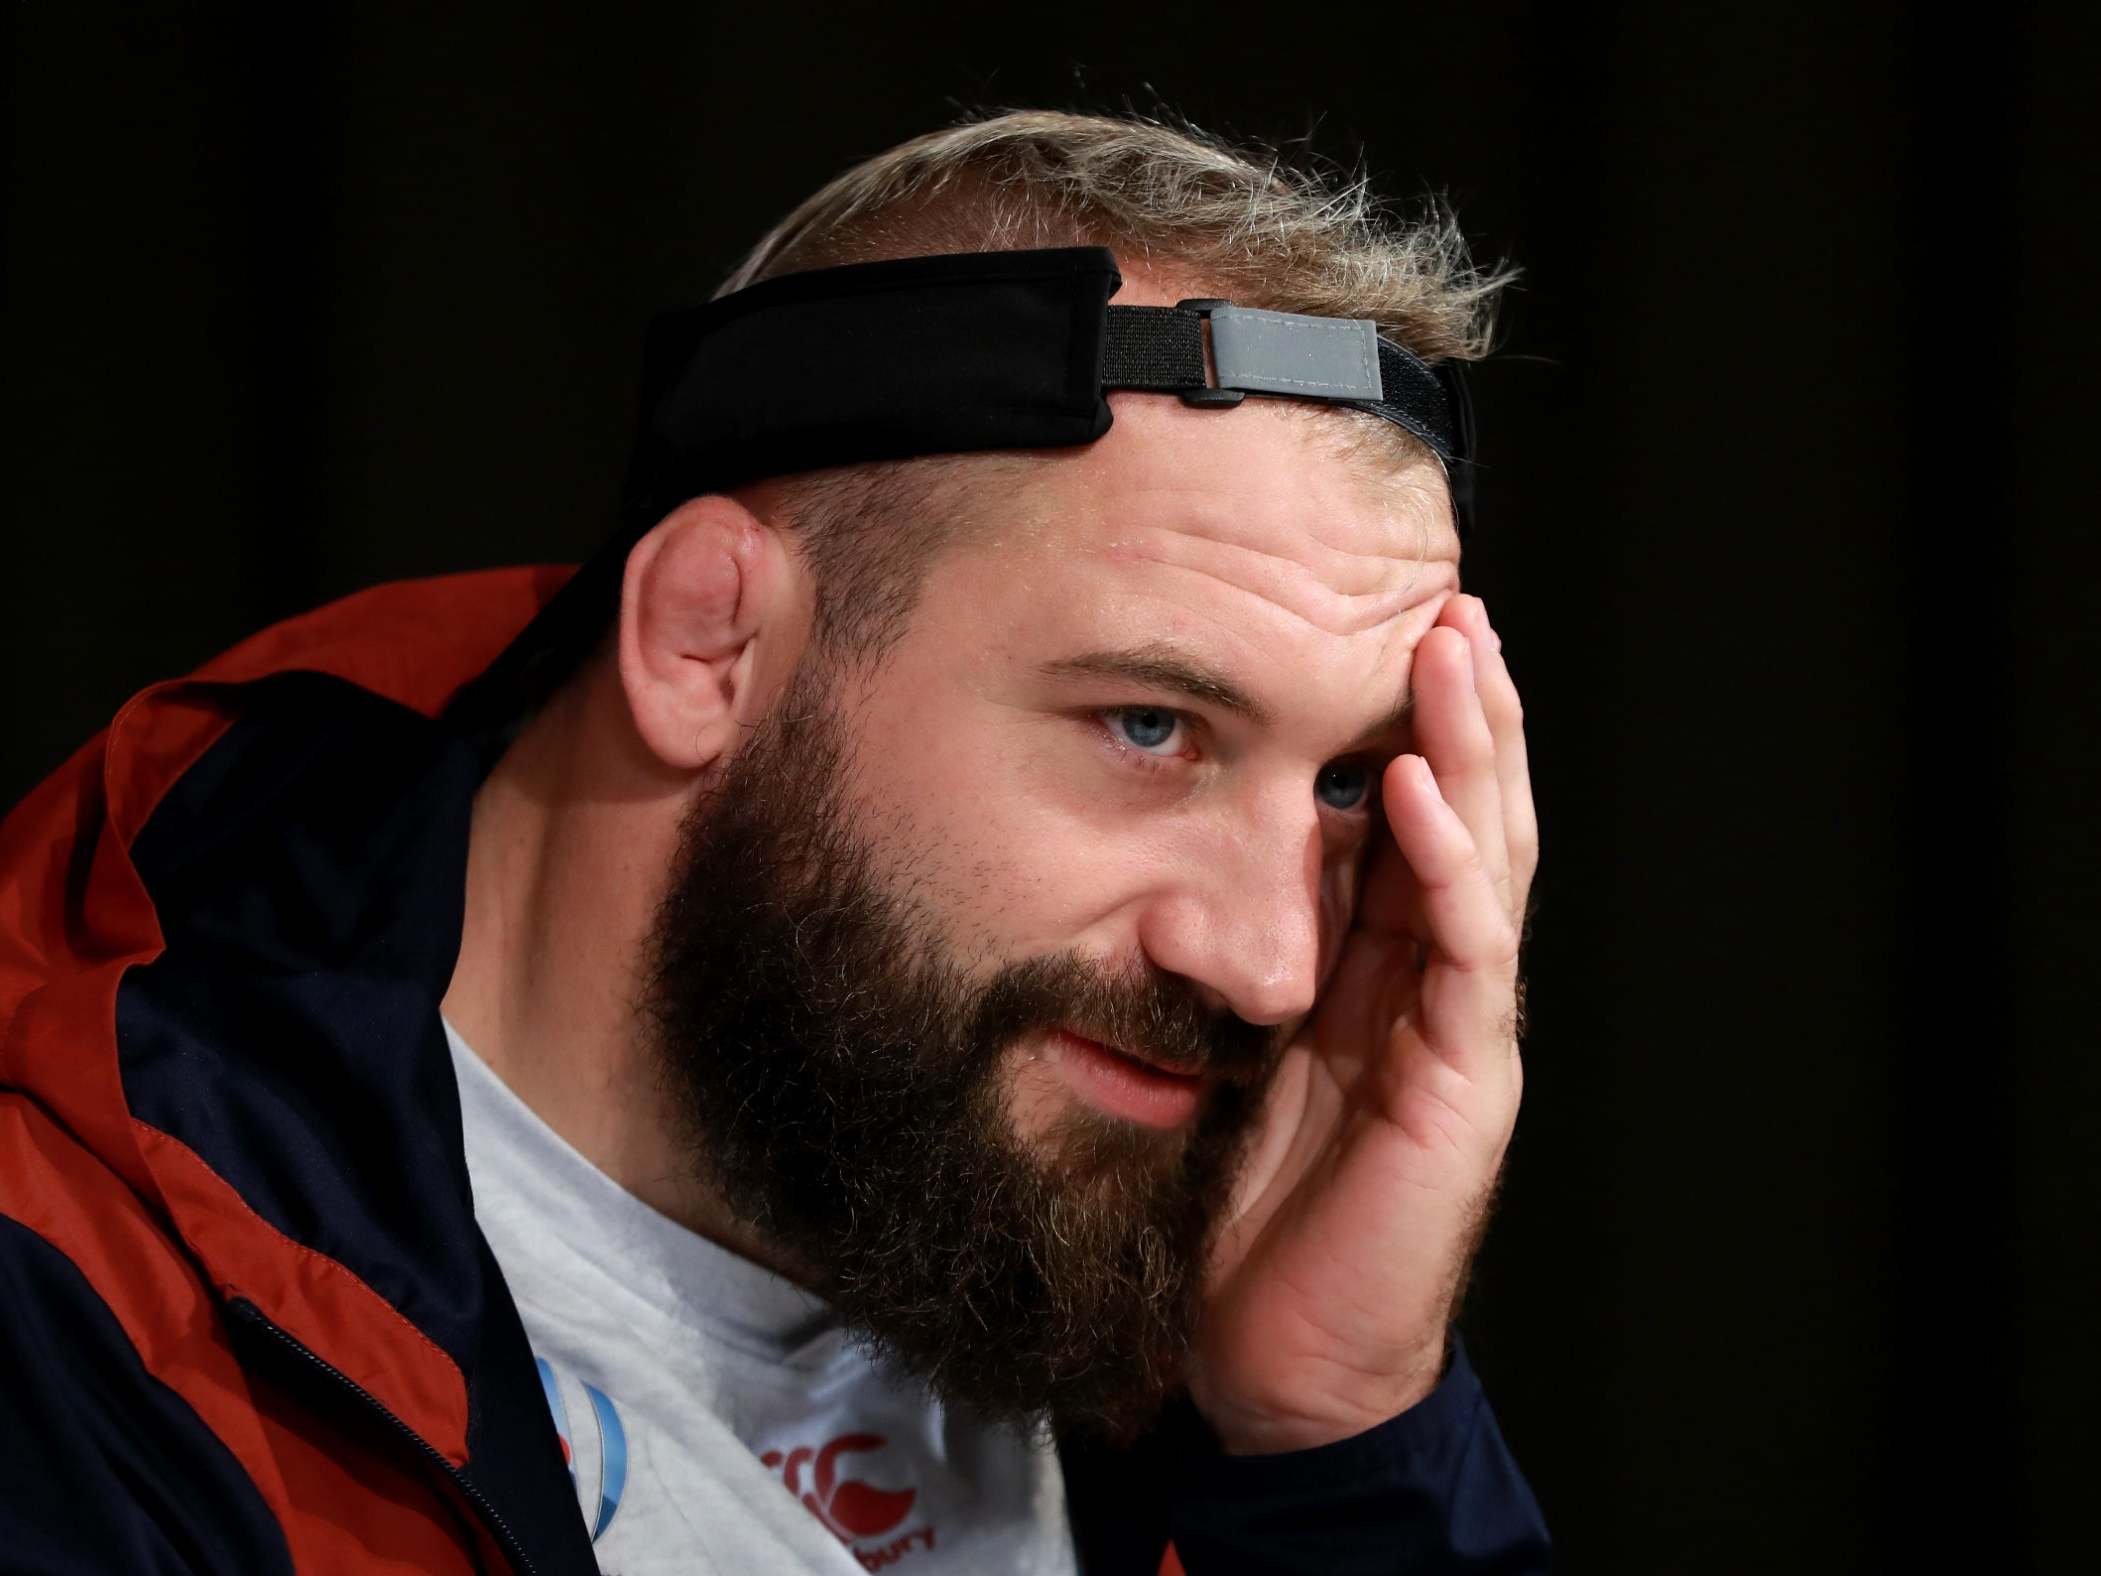 You never really know if Marler is pleased or frustrated at having to speak to the media